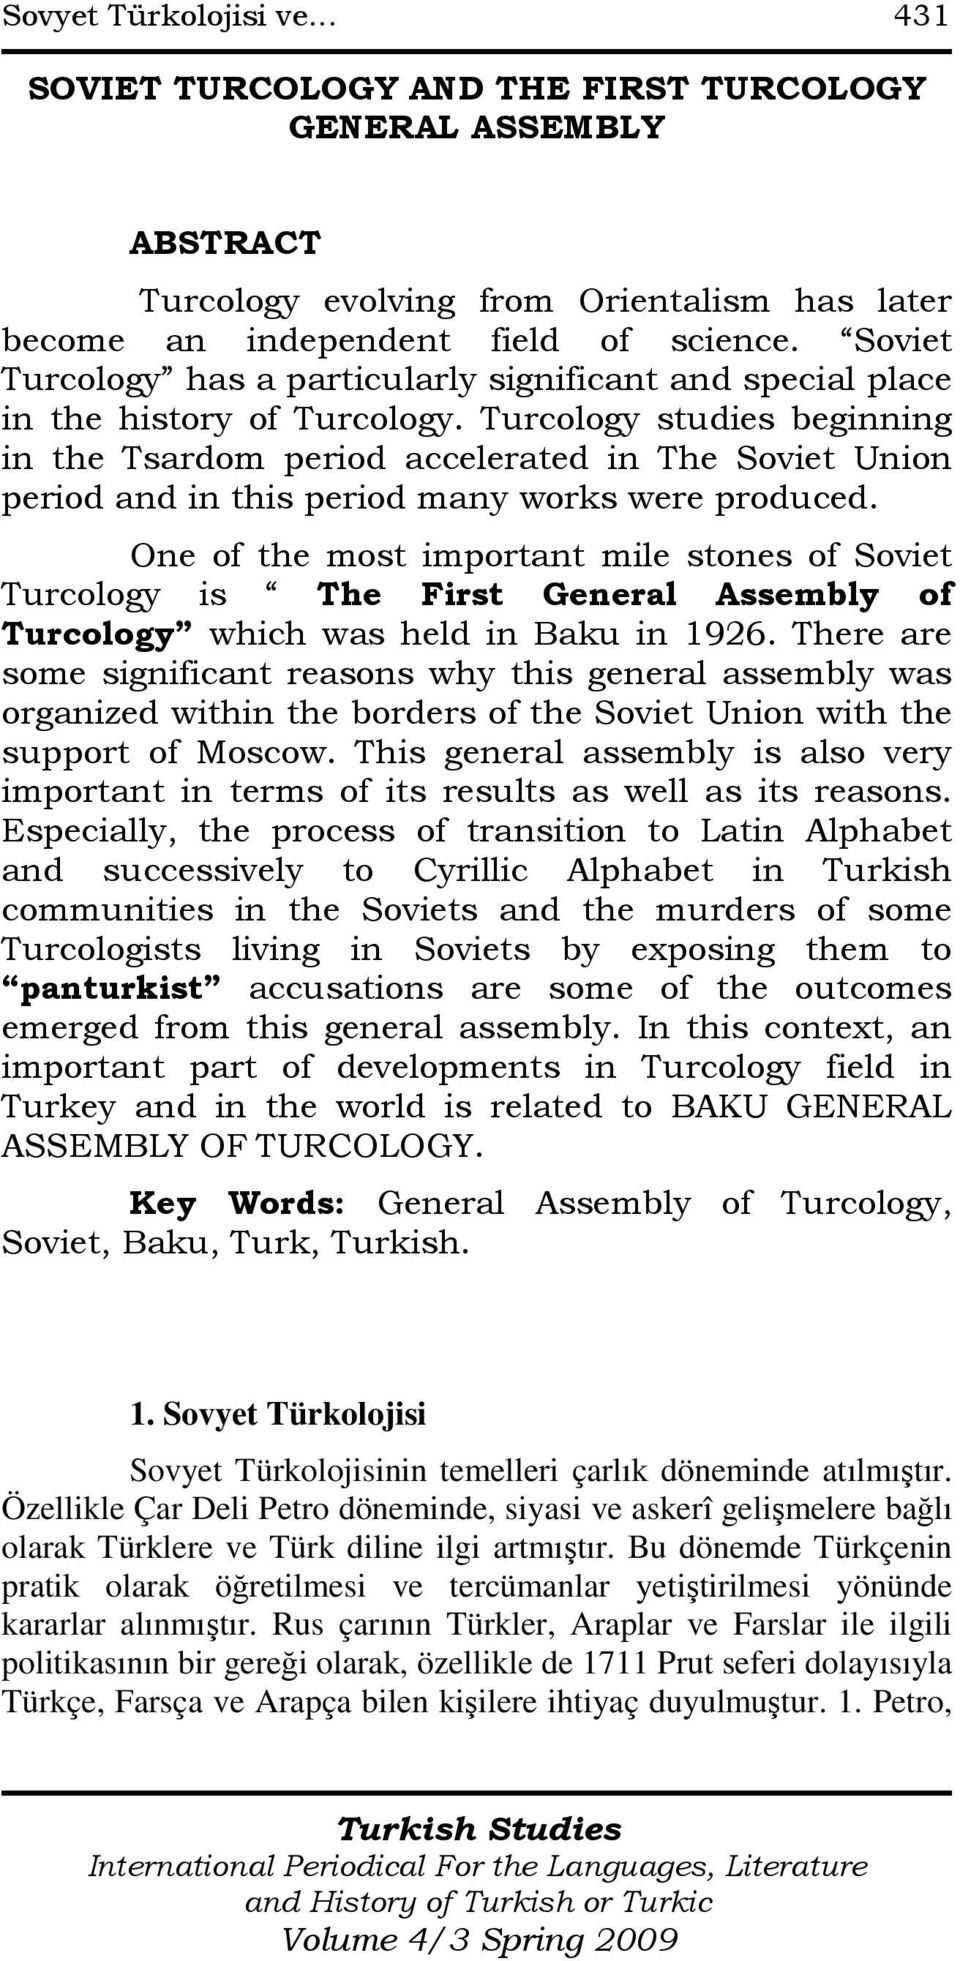 Turcology studies beginning in the Tsardom period accelerated in The Soviet Union period and in this period many works were produced.